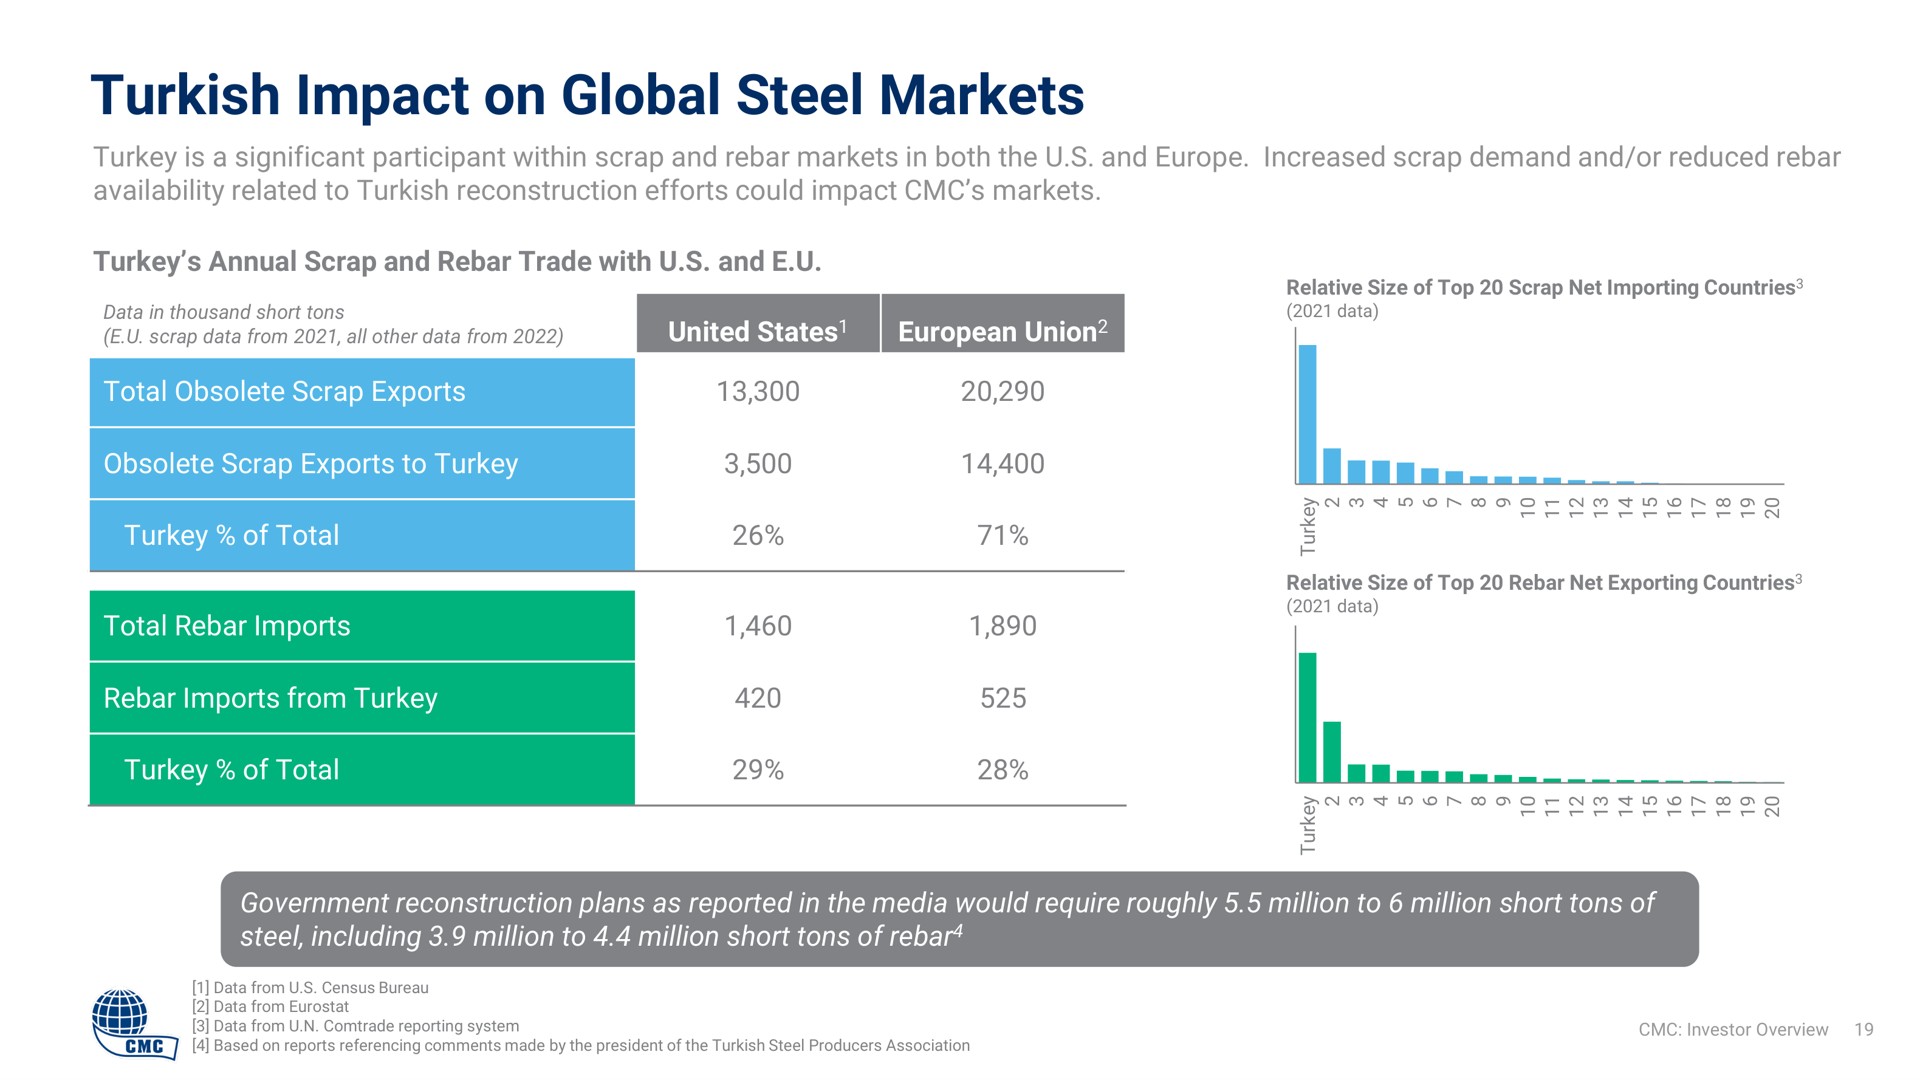 impact on global steel markets fen turkey of total | Commercial Metals Company